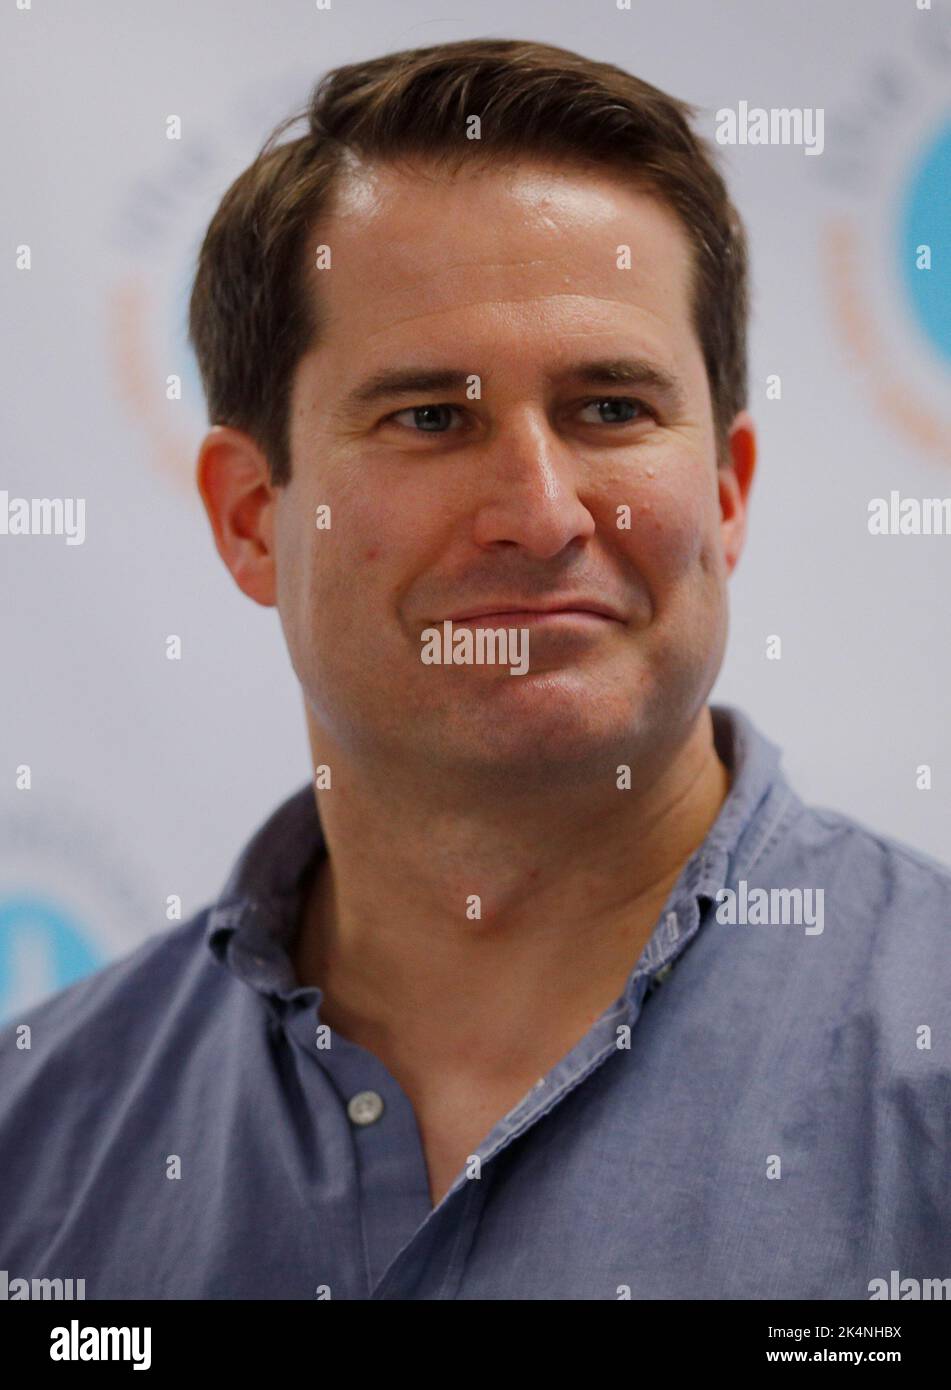 Democratic U.S. Rep. Seth Moulton from Massachusetts running for re-election to the U.S. House of Representatives in the 2022 U.S. midterm elections, listens during a campaign roundtable discussion with representatives from the AmeriCorps Victims Assistance Program in Concord, New Hampshire, U.S., April 23, 2019.   REUTERS/Brian Snyder Stock Photo